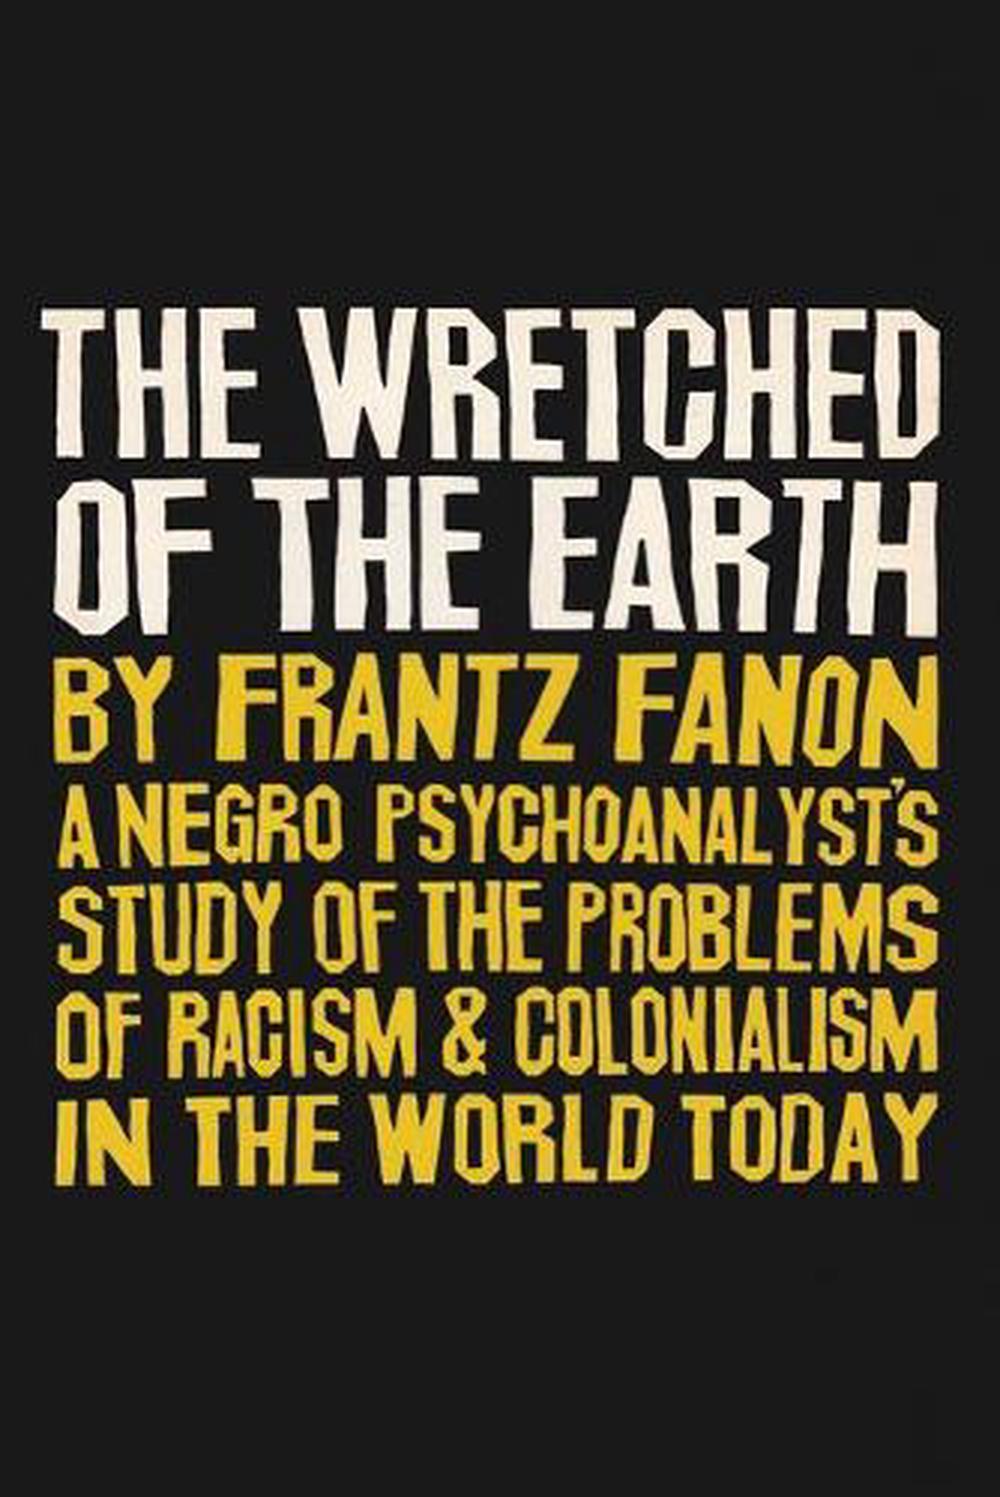 in the wretched of the earth frantz fanon